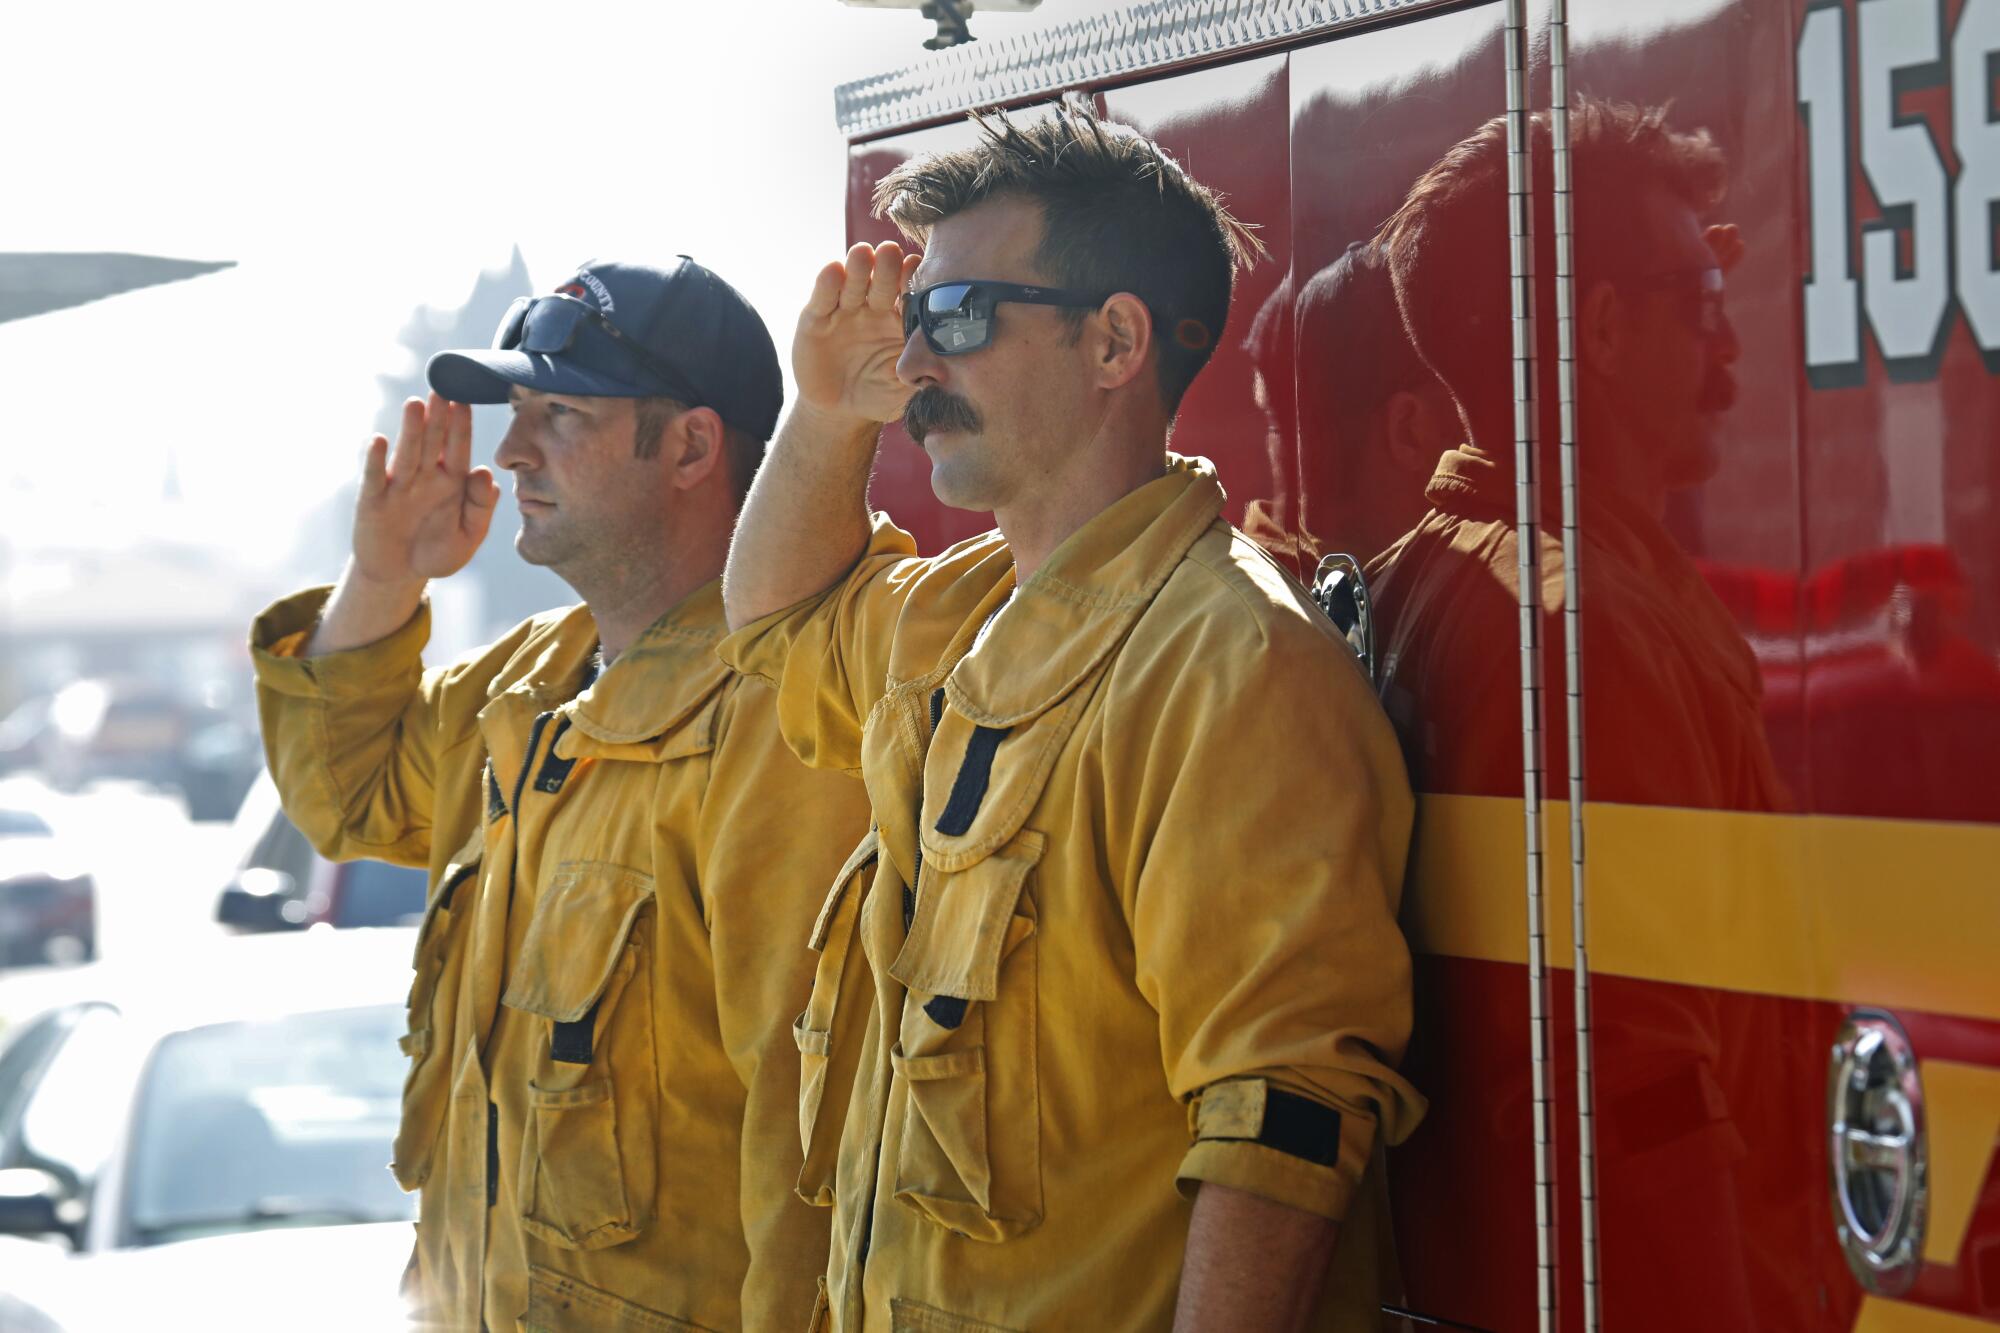 Two firefighters salute